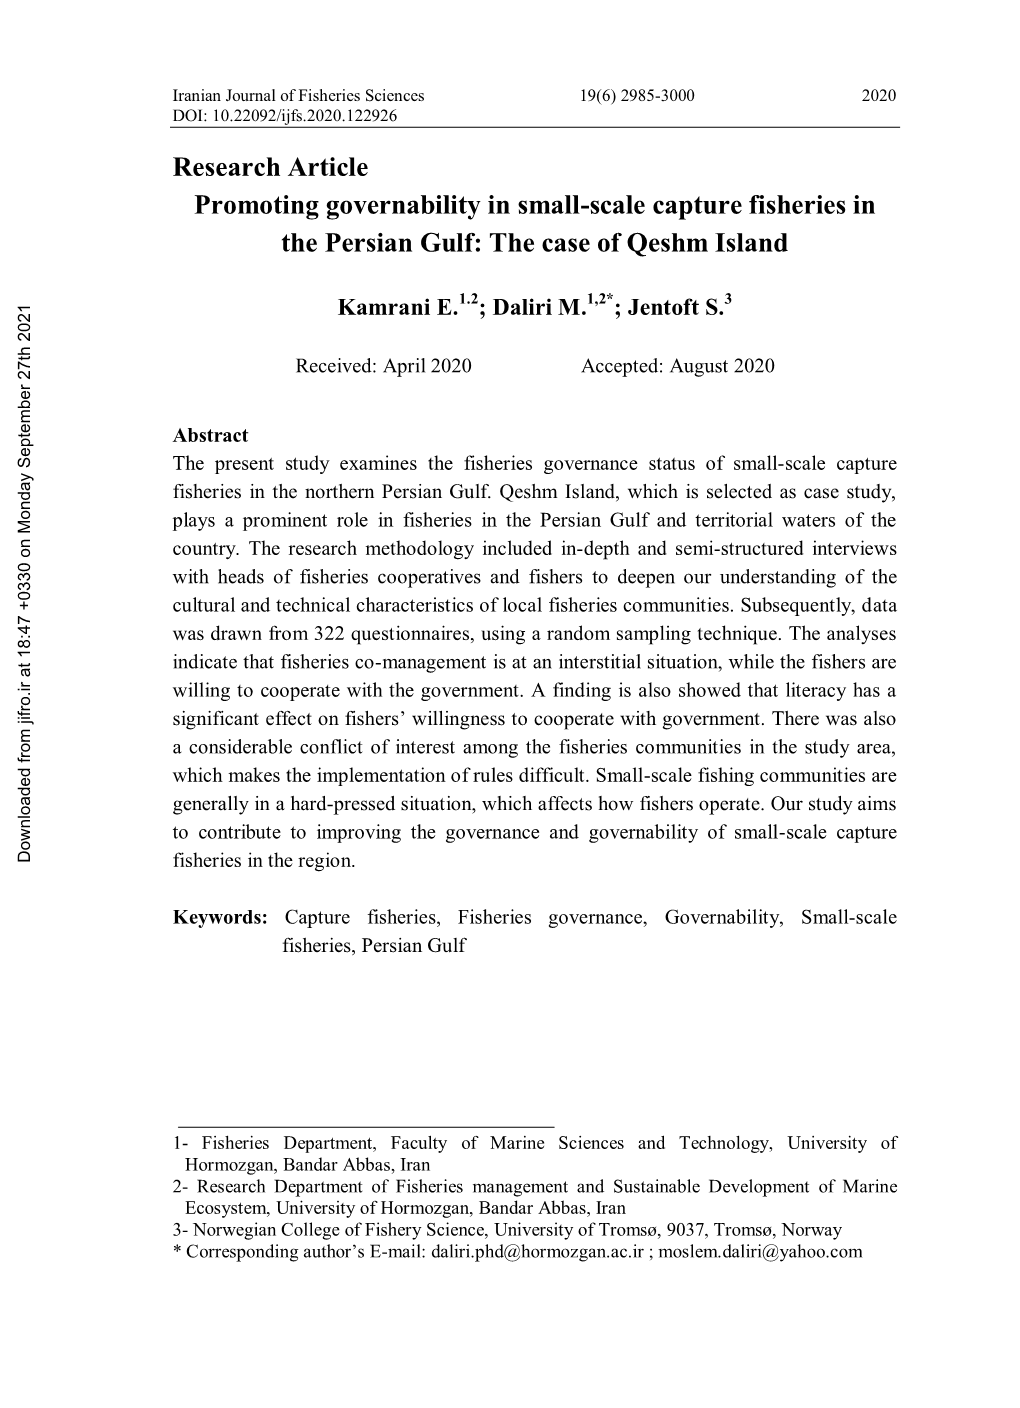 Research Article:Promoting Governability in Small-Scale Capture Fisheries in the Persian Gulf: the Case of Qeshm Island